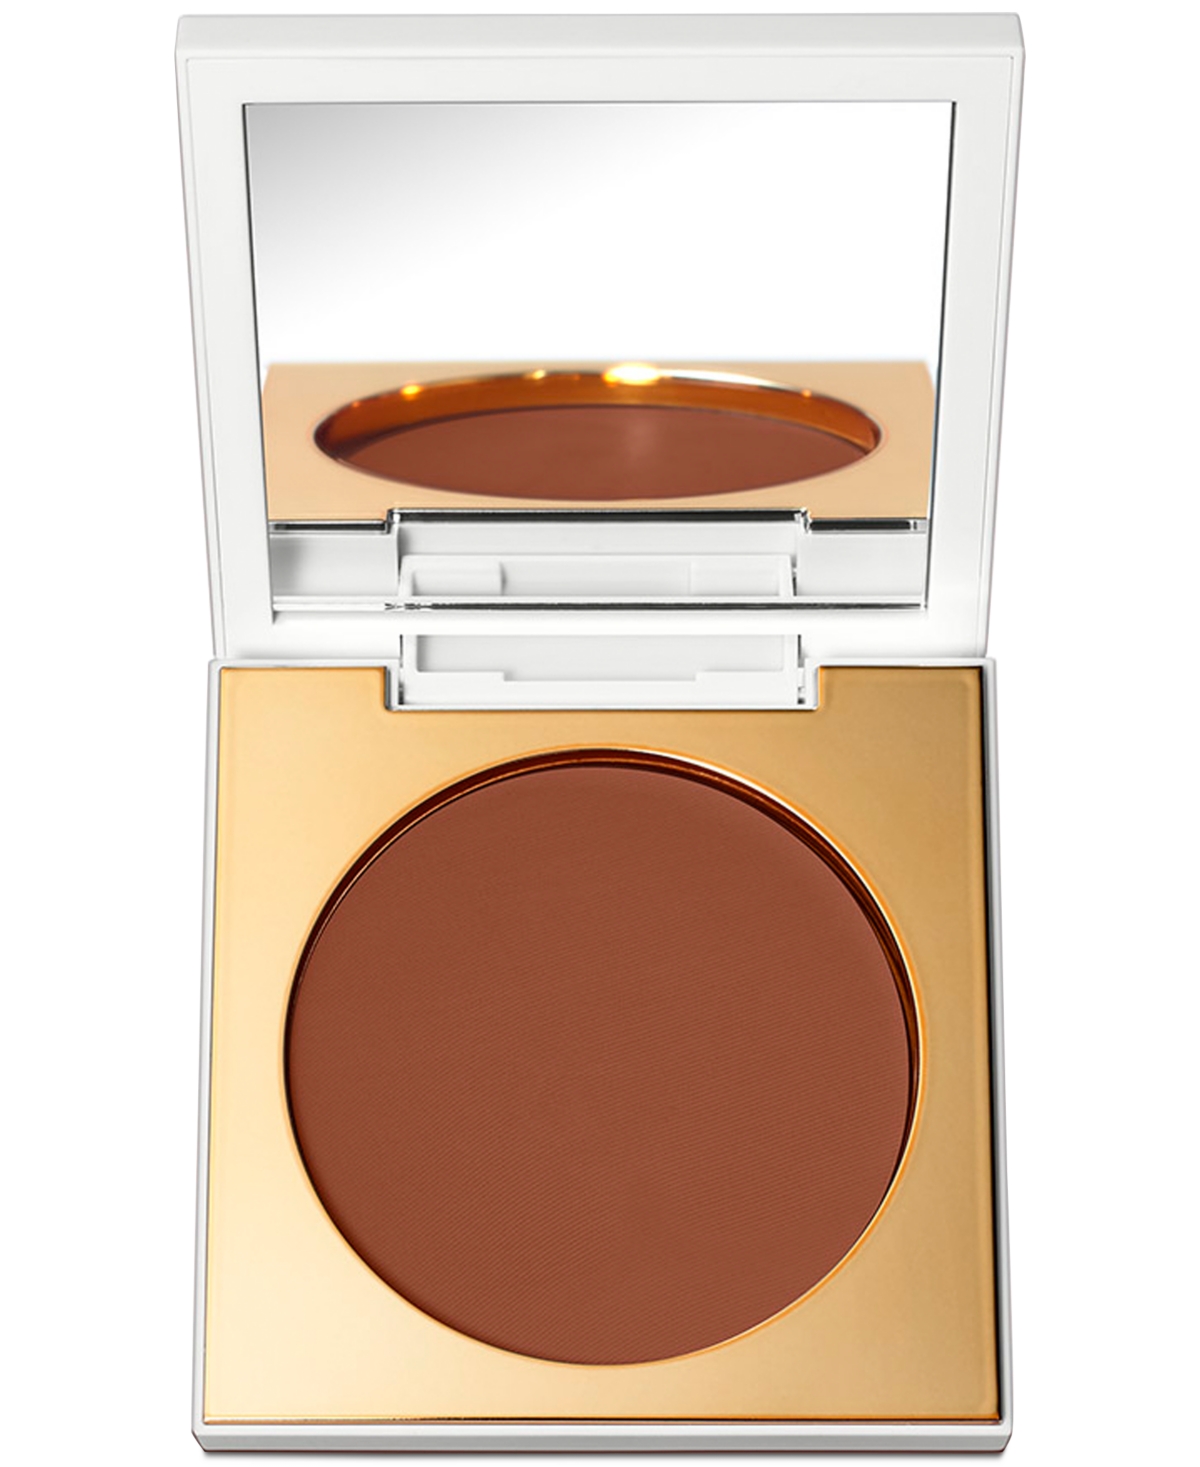 Fashion Fair Iconic Pressed Powder In Sultry Sepia